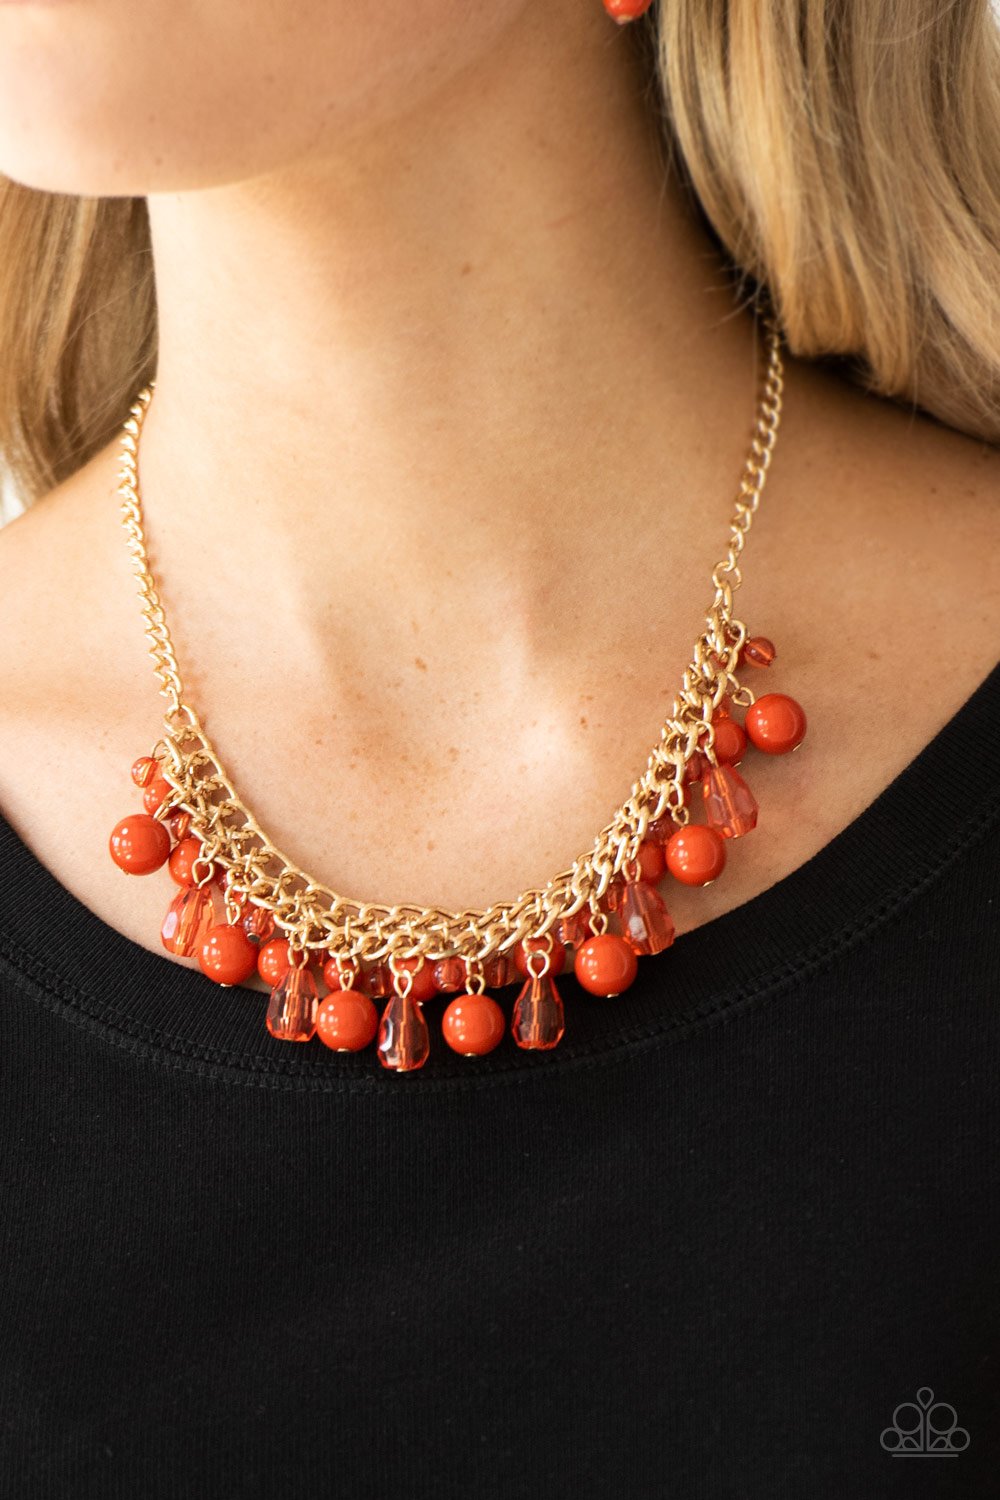 Tour de Trendsetter - Orange and Gold Necklace - Paparazzi Accessories - Varying in shape, glassy and polished orange beads swing from the bottom of interlocking gold chains. Crystal-like teardrops are sprinkled along the colorful beading, creating a flirtatious fringe below the collar.